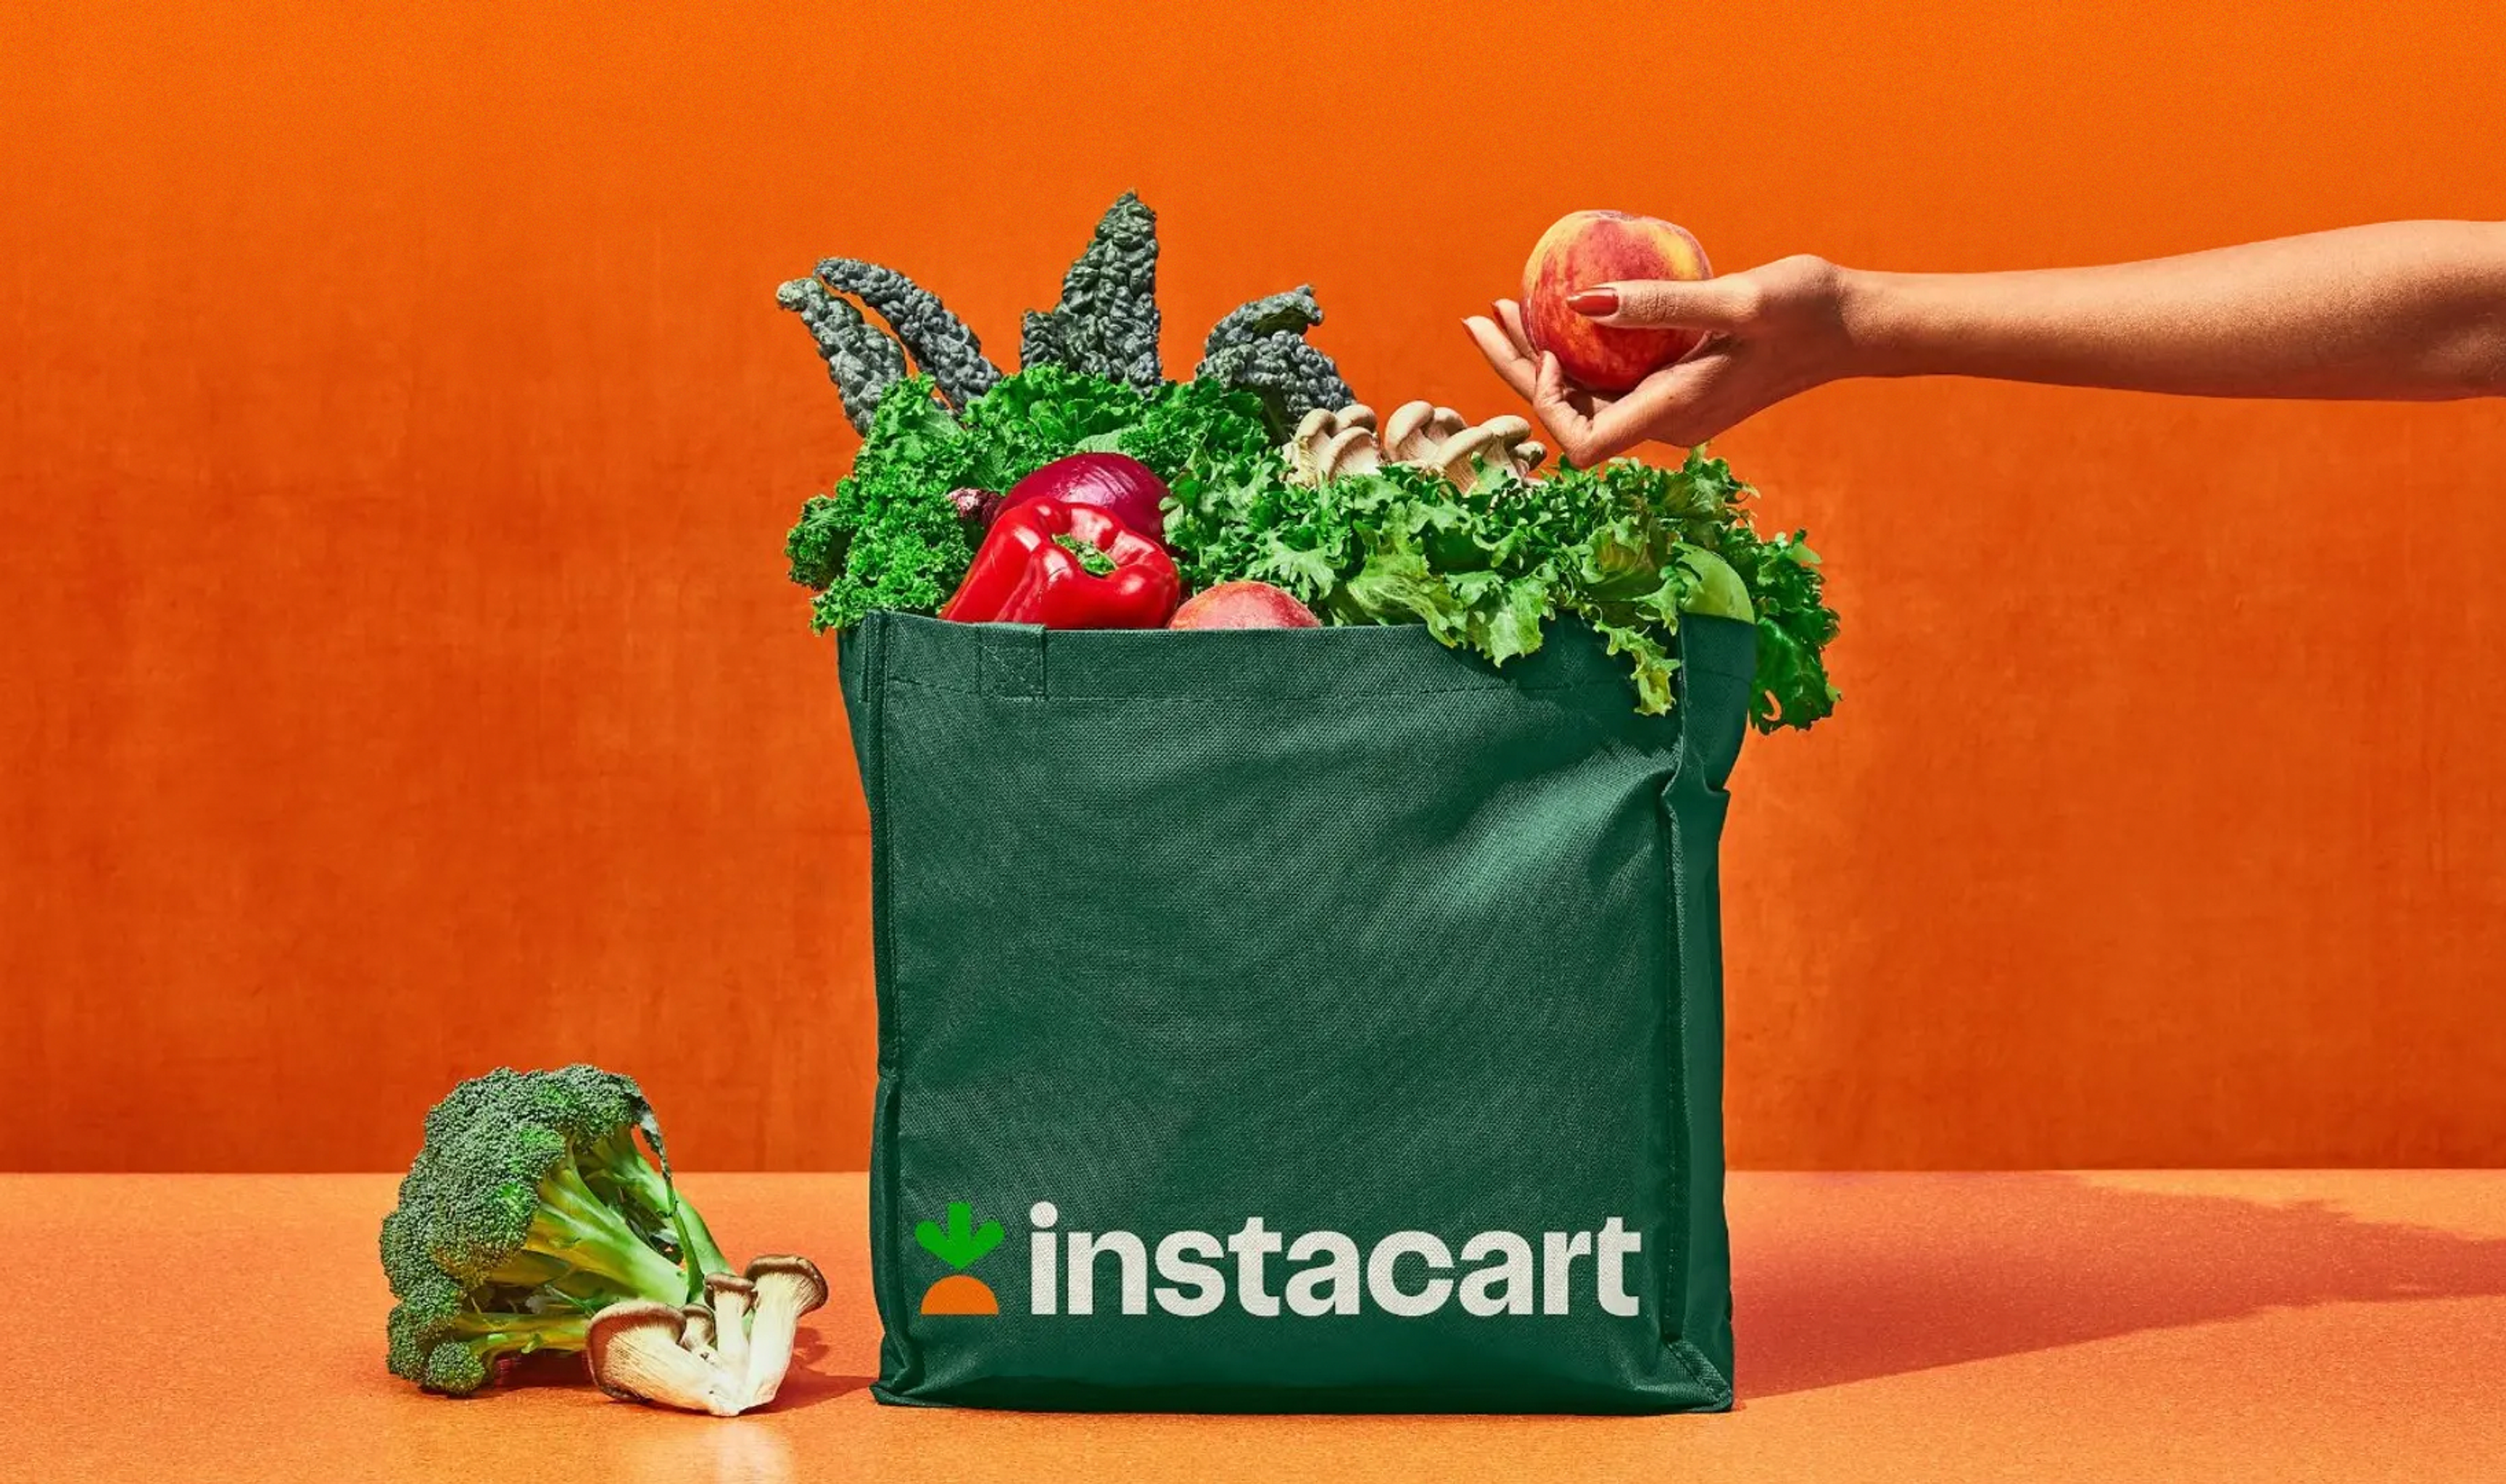 A hand adds an apple to a green Instacart bag full of fresh produce, with an orange backdrop.